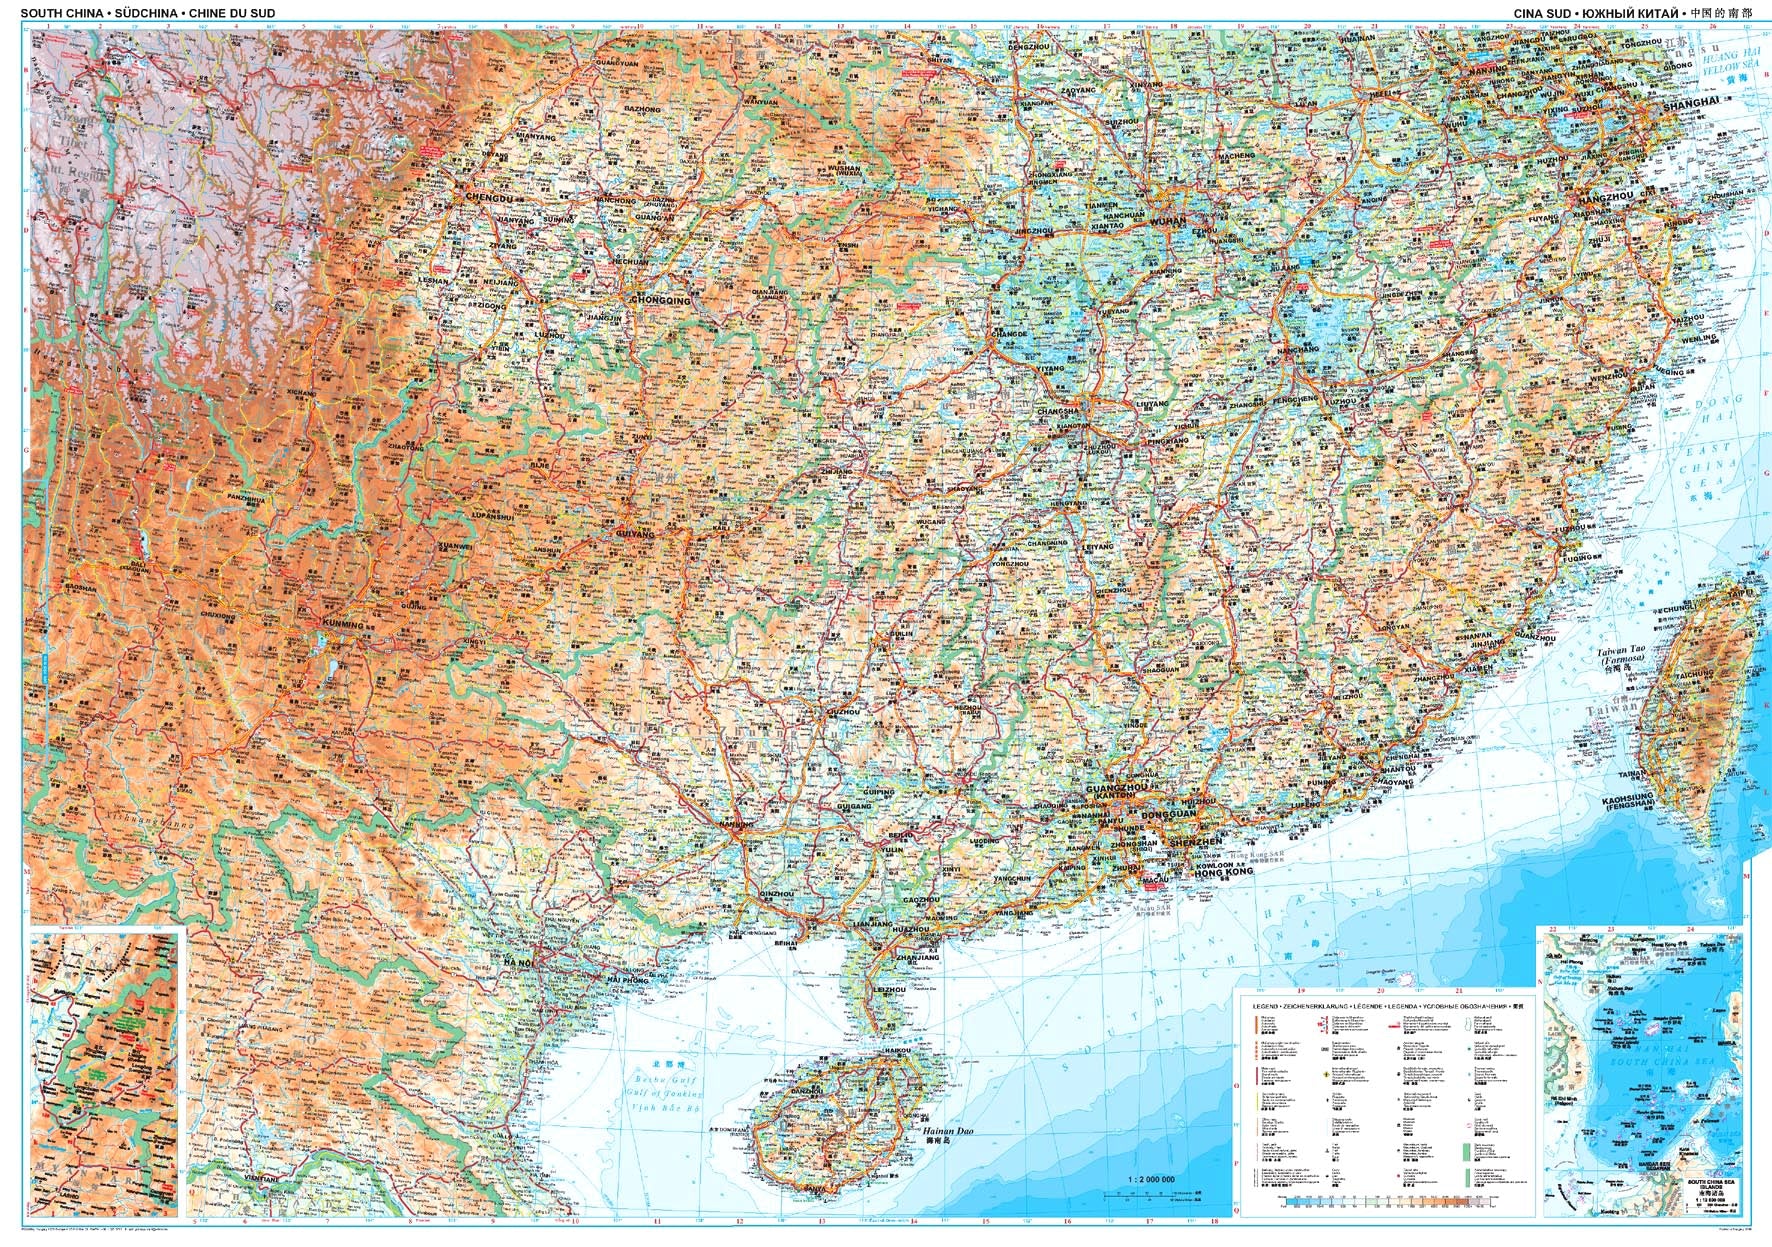 China South Geographical Map 1:2 Mio.